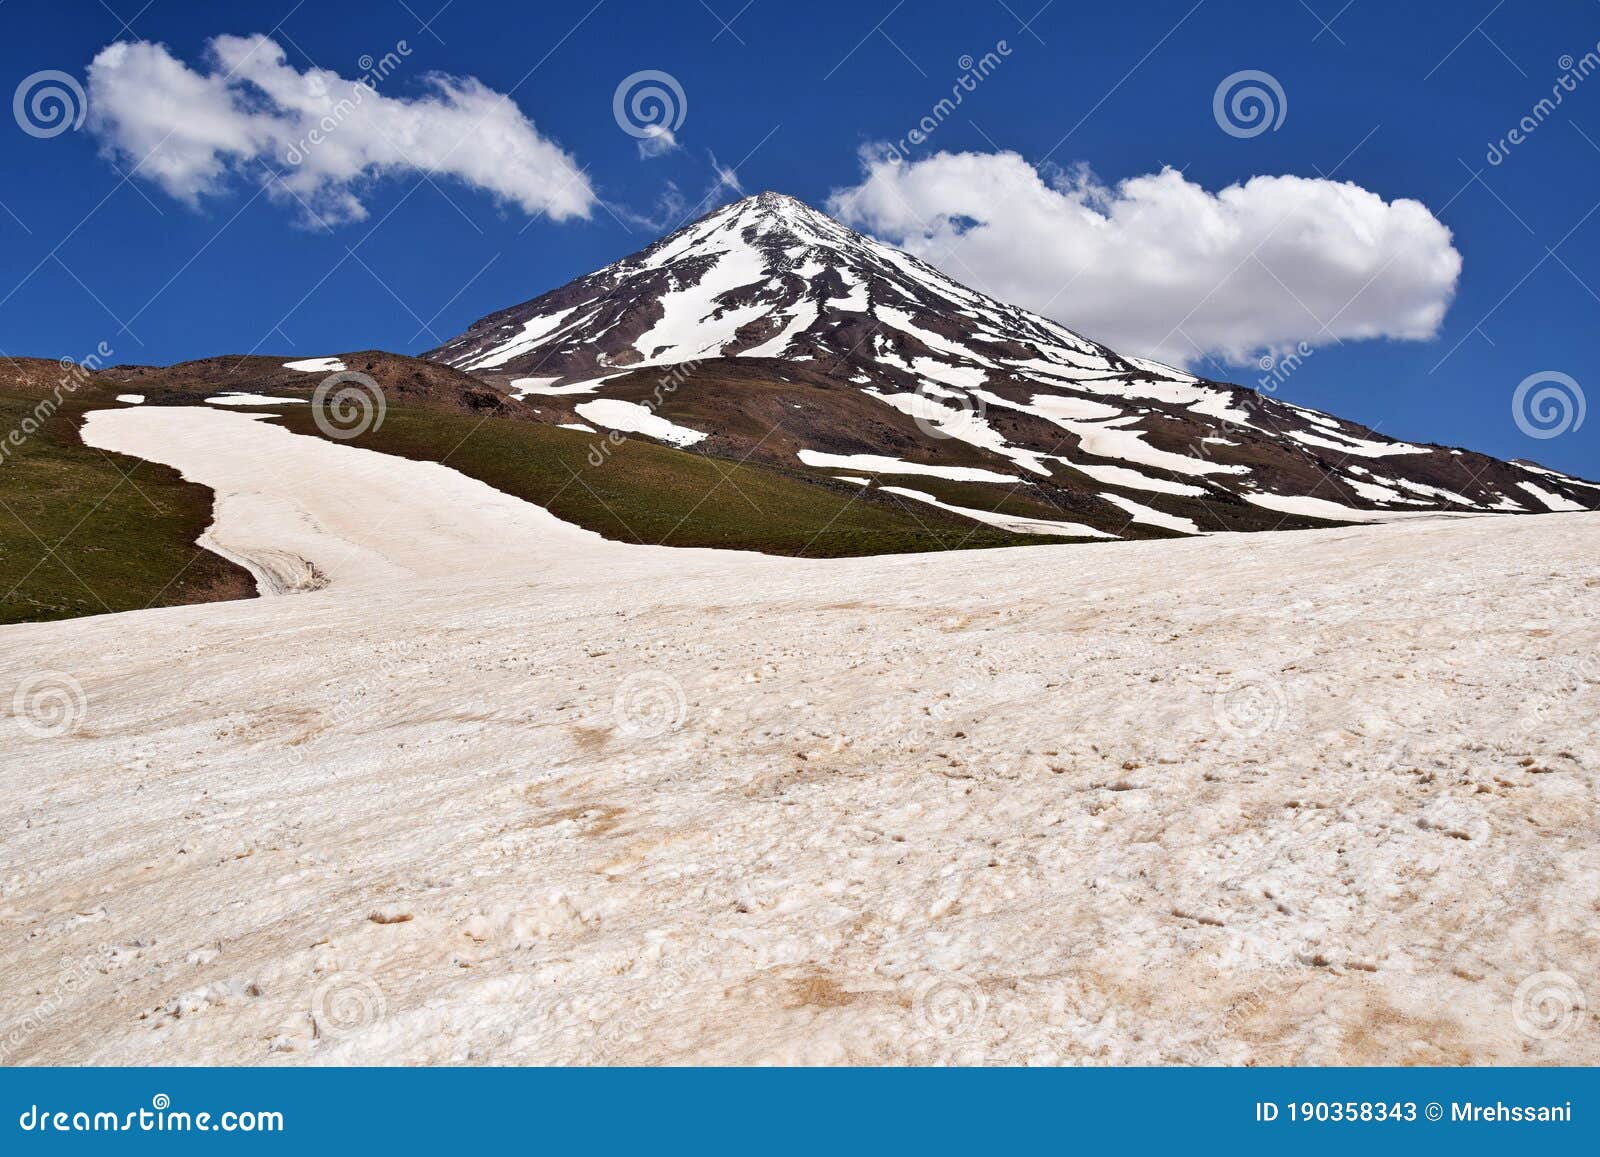 the landscape of mount damavand and glacier from north west ridge , iran